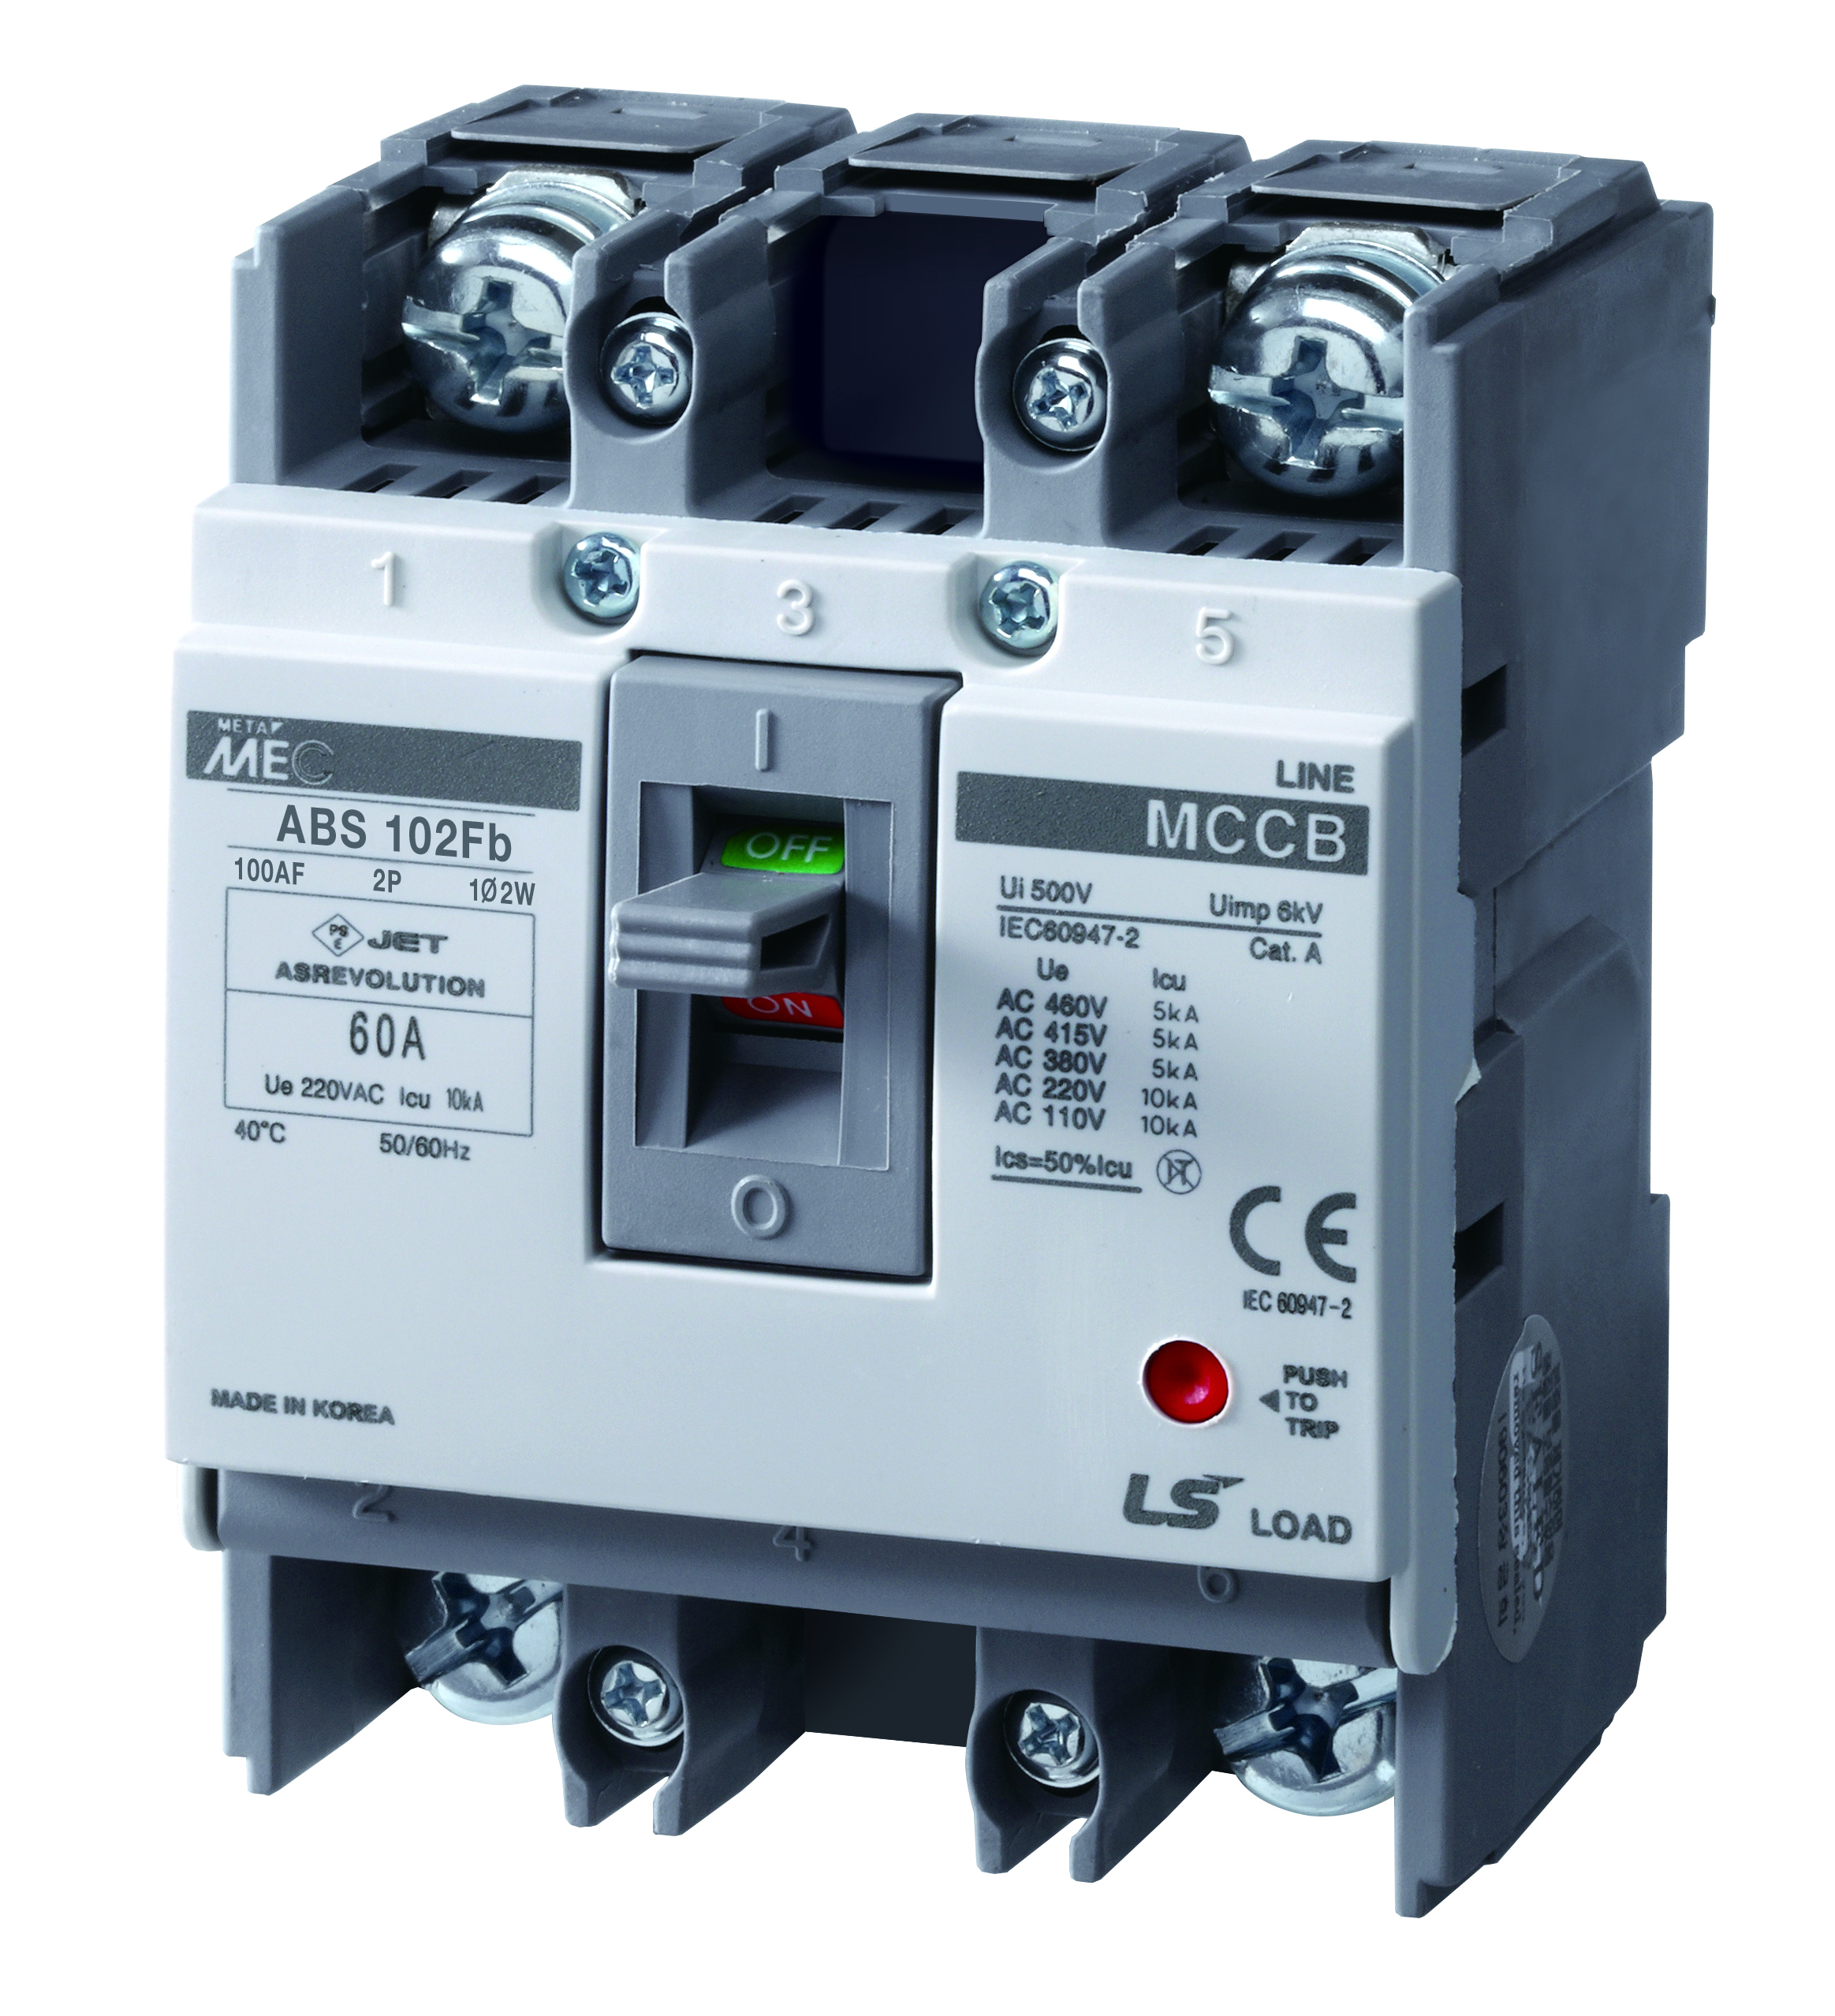 Molded Case Circuit Breakers - Fuseless, ABS Series, DIN Rail Mounting ABS103FB-60A